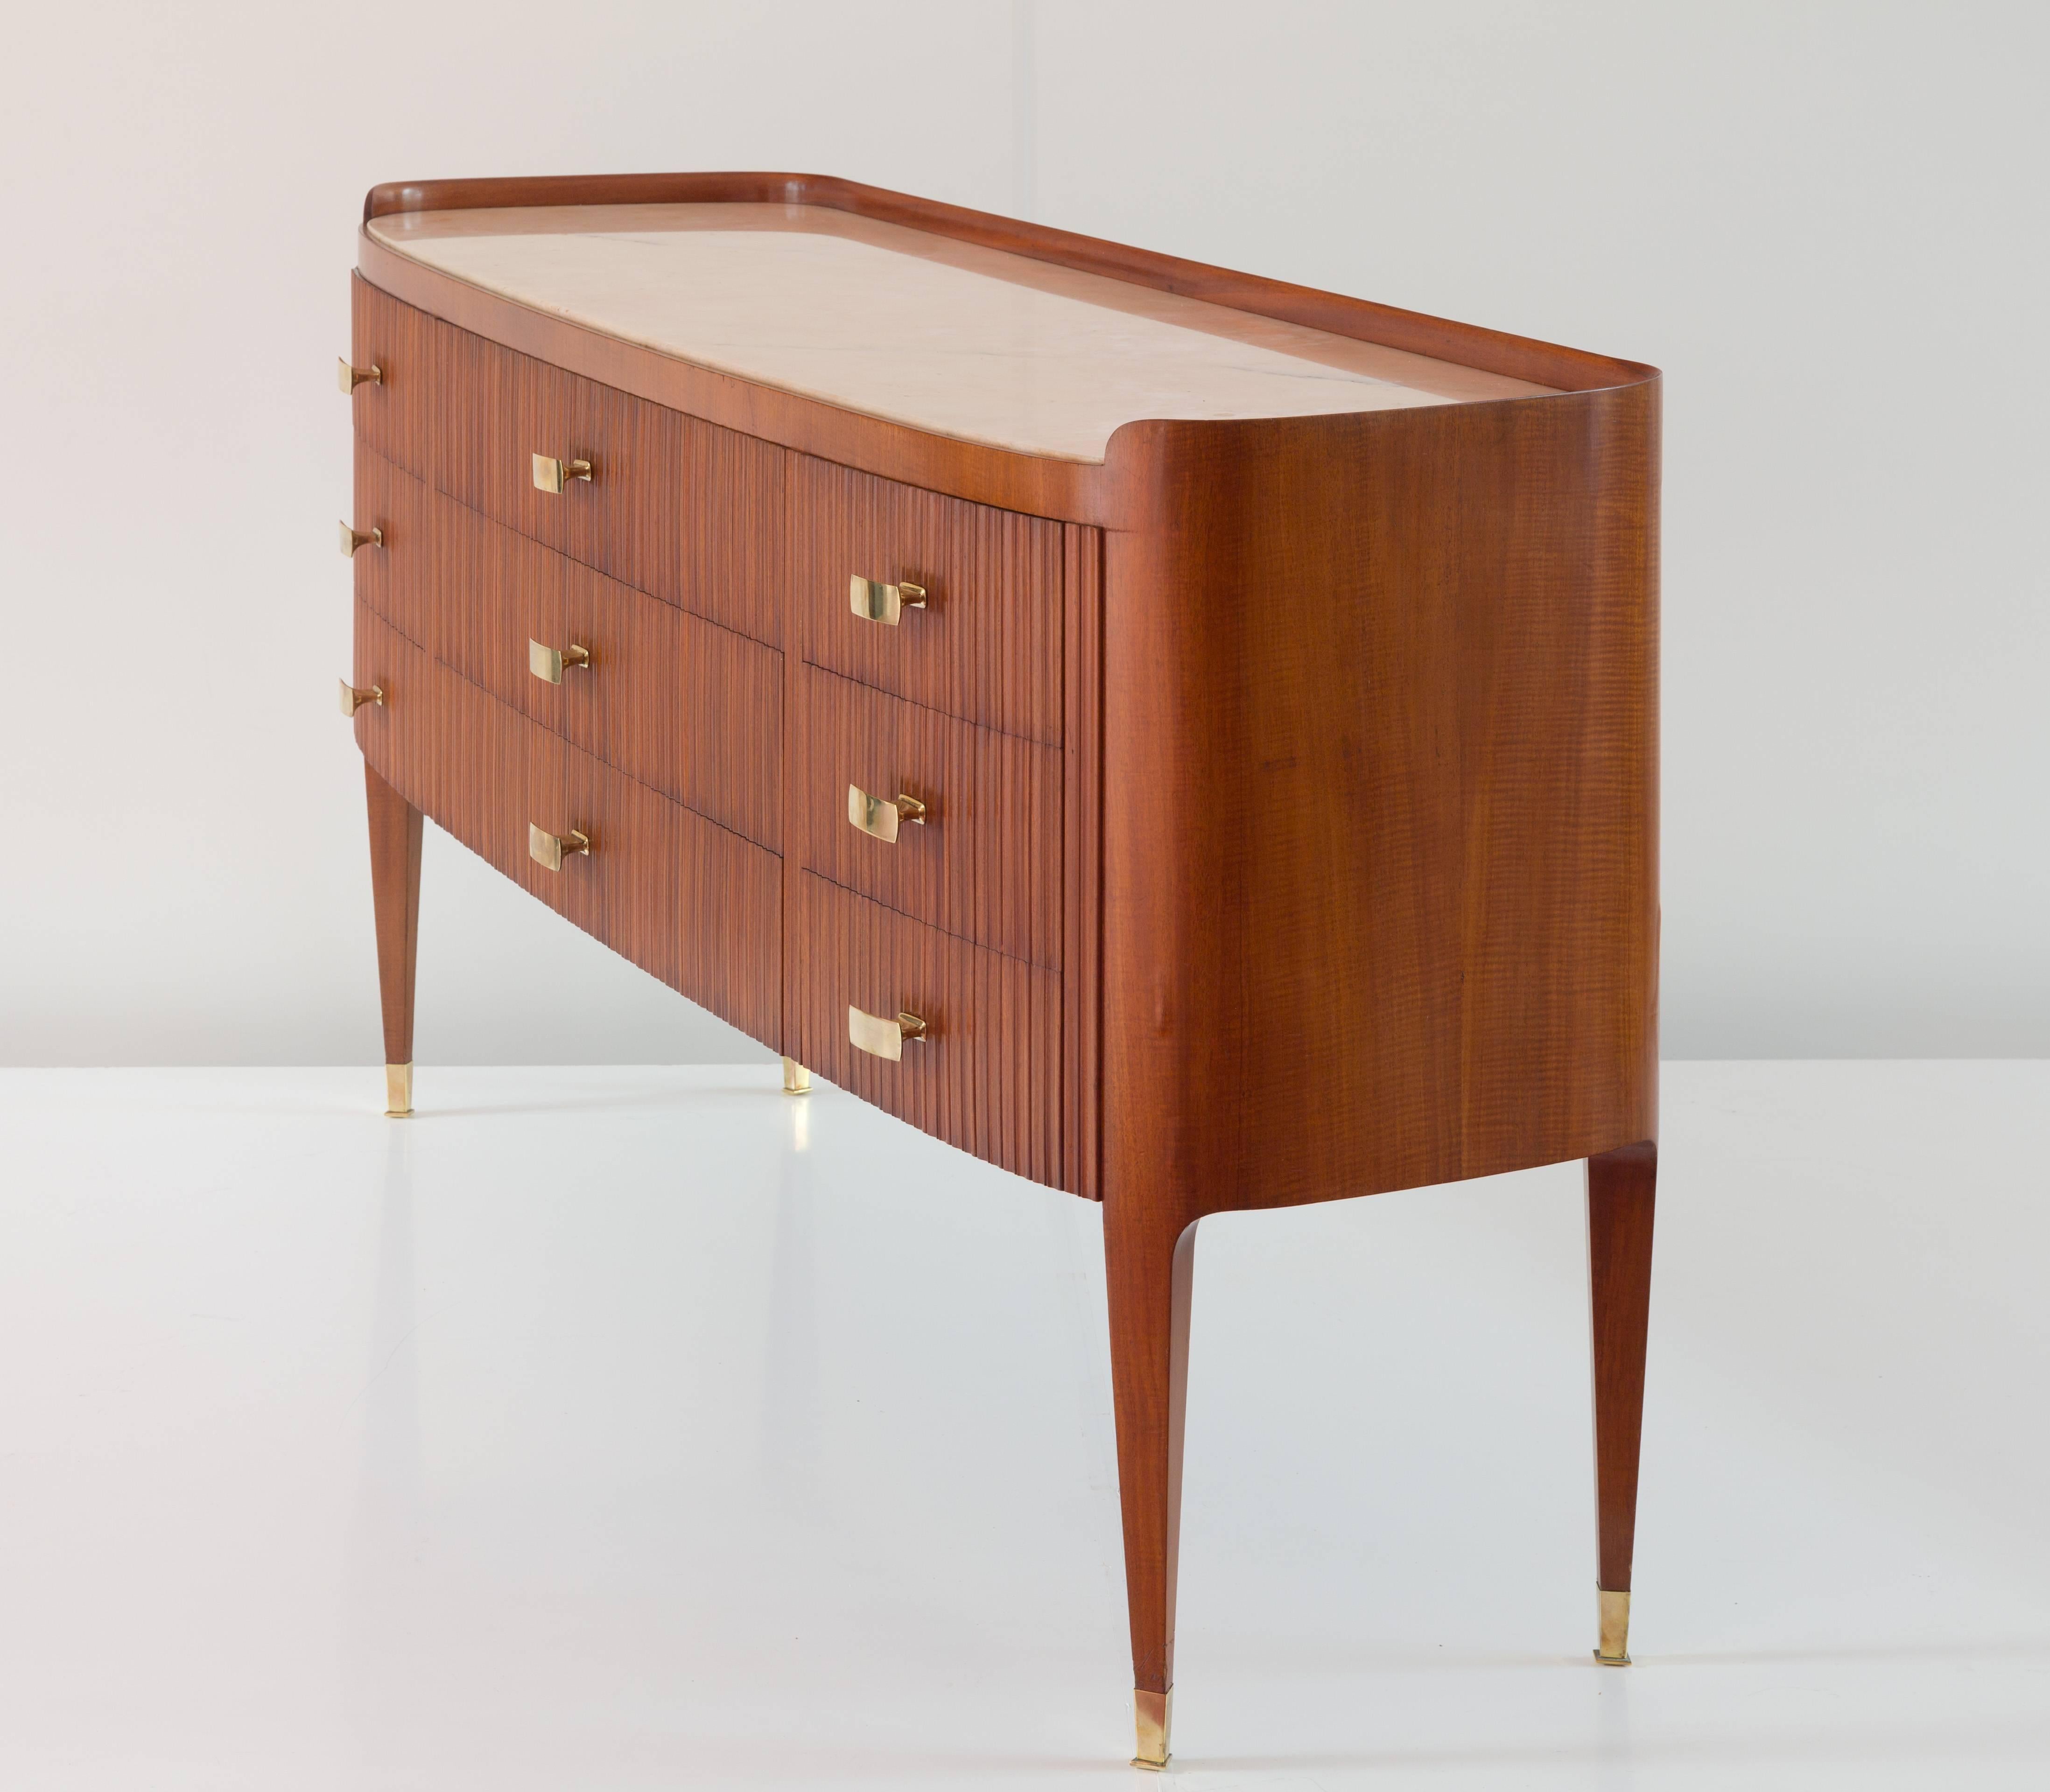 Impressive and rare chest of drawers designed by Paolo Buffa, 1948.
Executed by F.lli Lietti, Cantù.
Nine drawers, nine sculptural brass handle
brass sabot.
Top in rare pink Candoglia marble (2 cm)
mahogany-veneered, rosewood, marble,